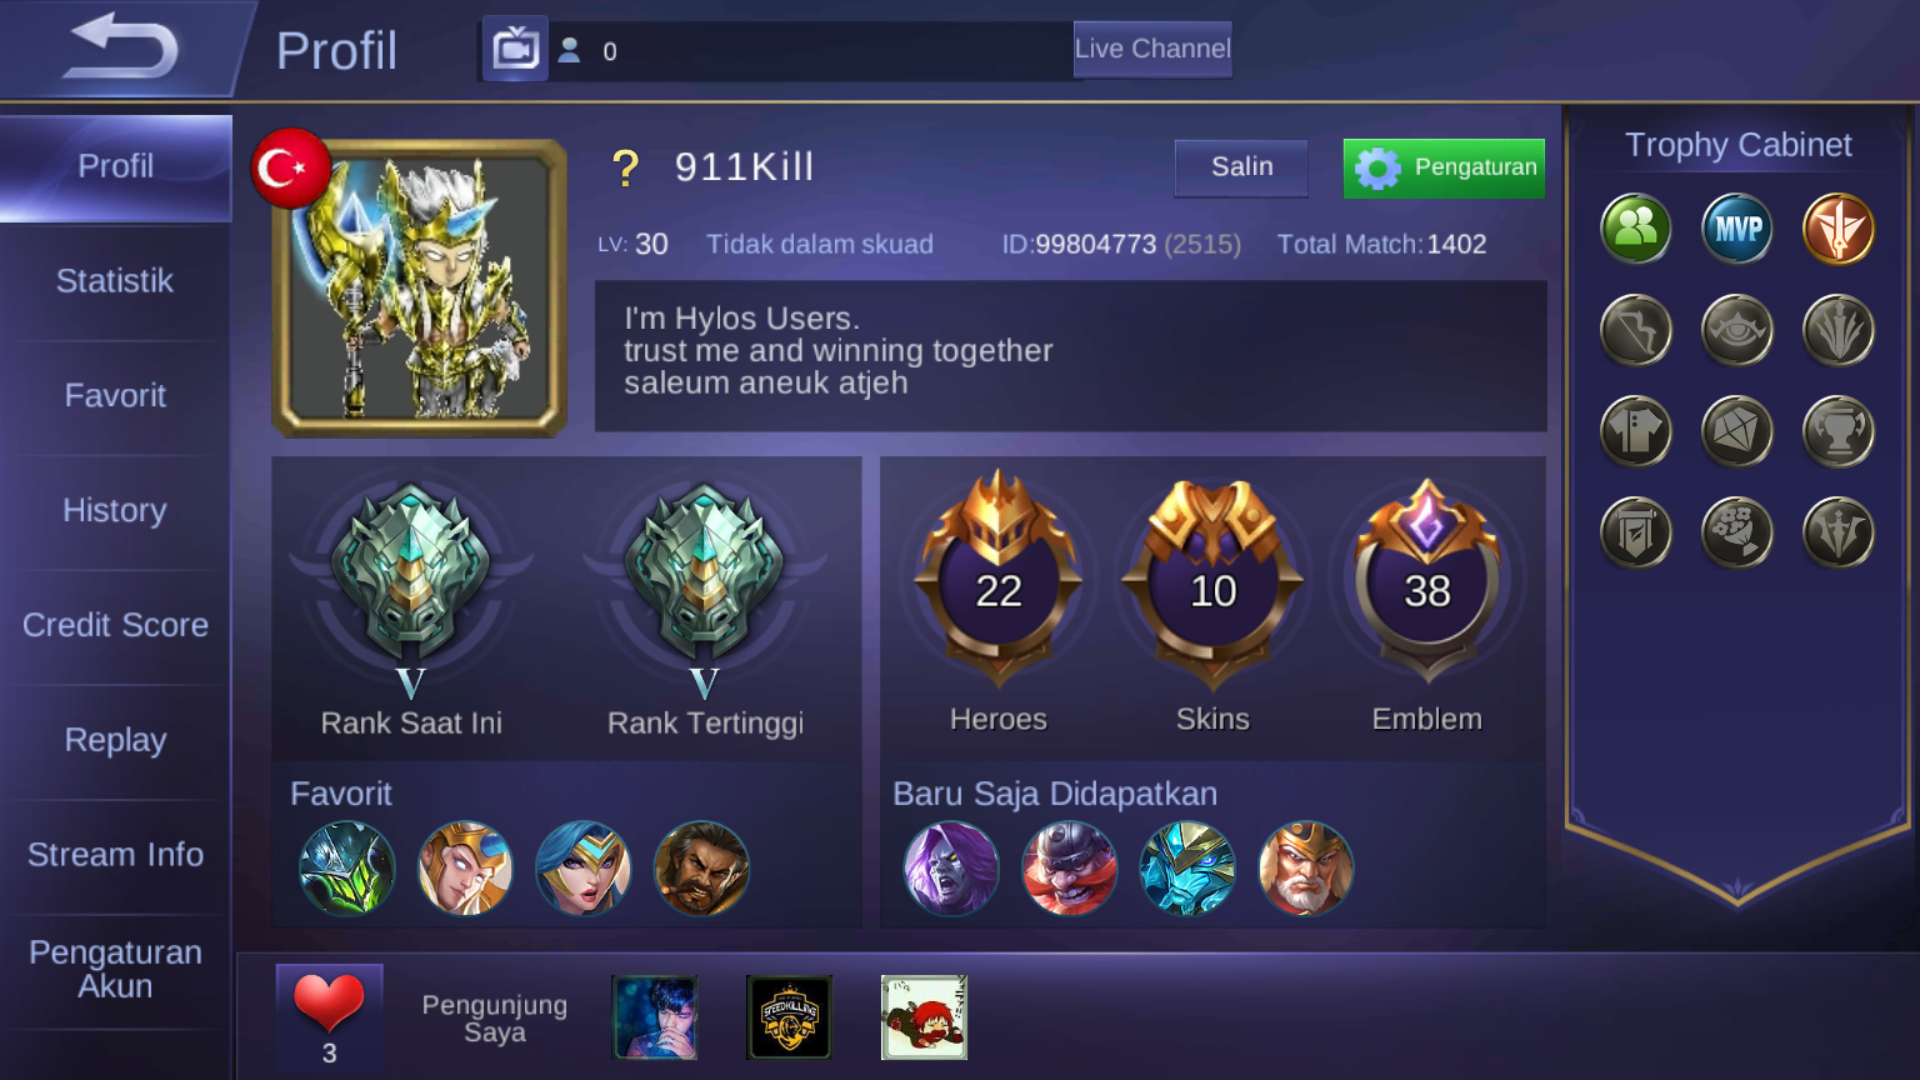 How to Improve My Rank in Mobile Legends